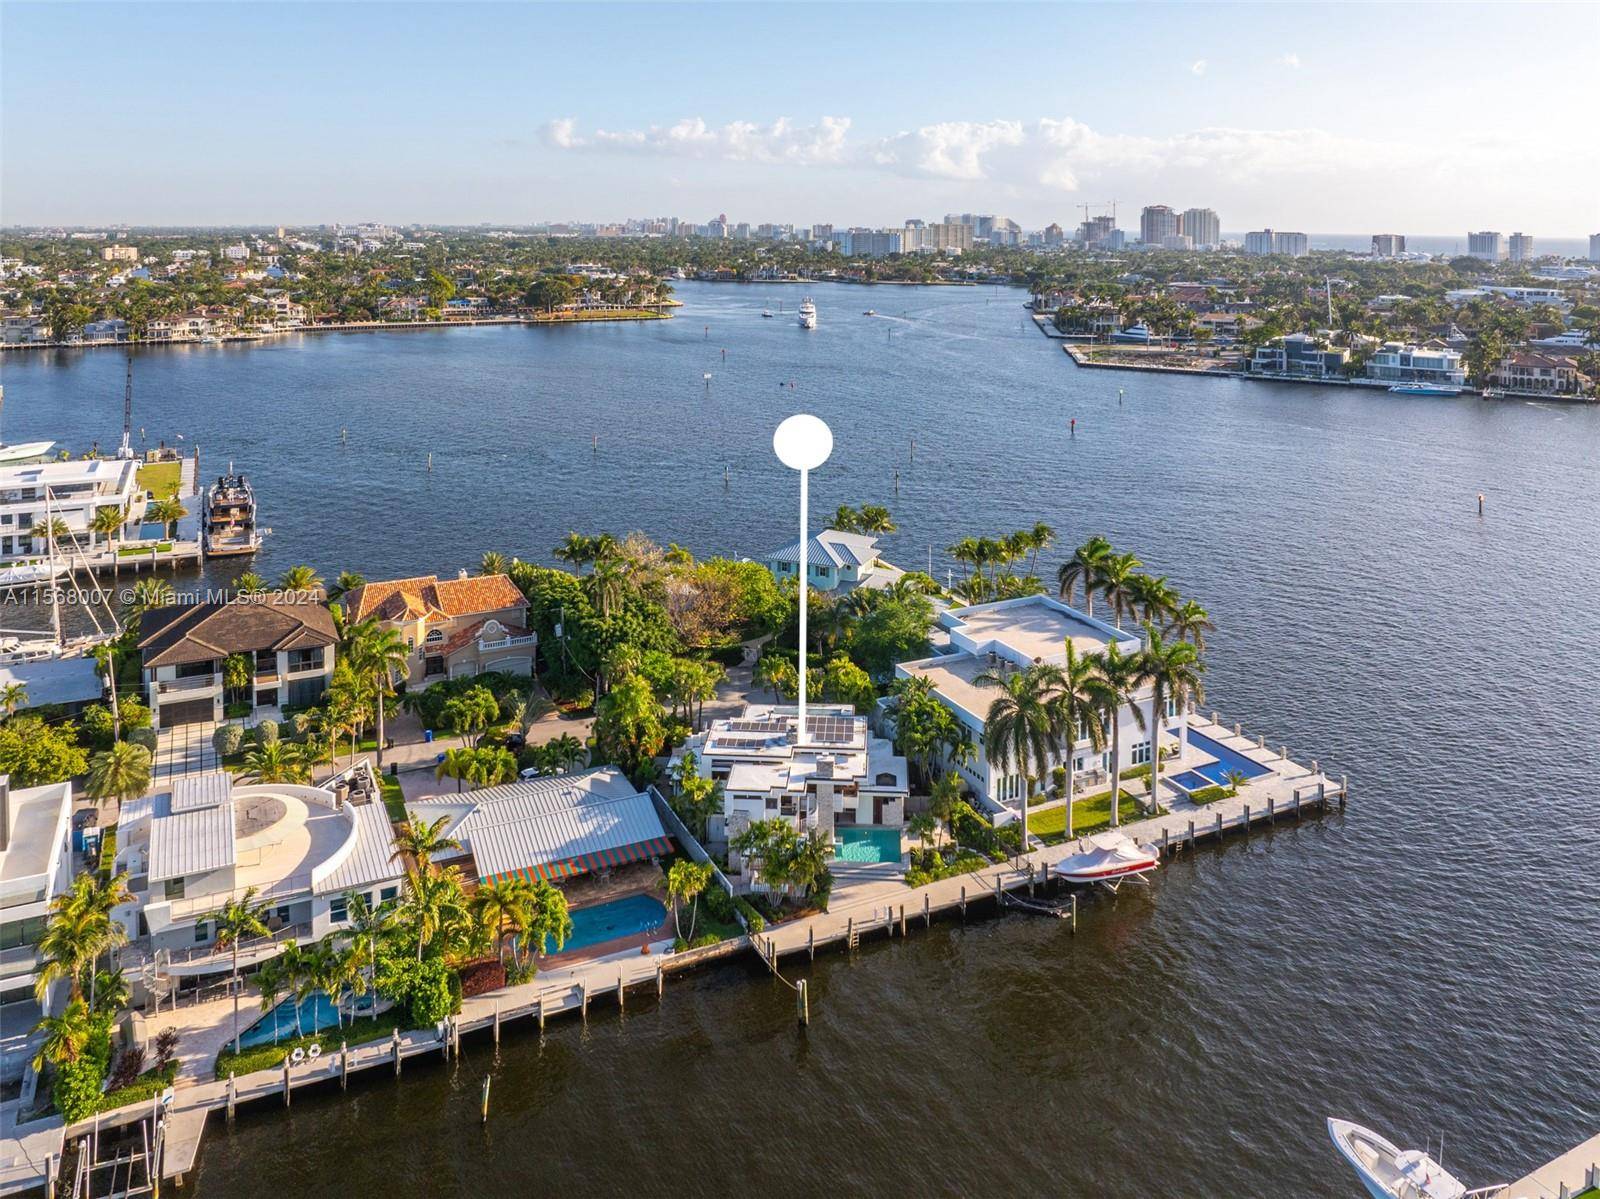 Impeccably located within Fort Lauderdale s famous waterfront neighborhood, Lauderdale Harbors.